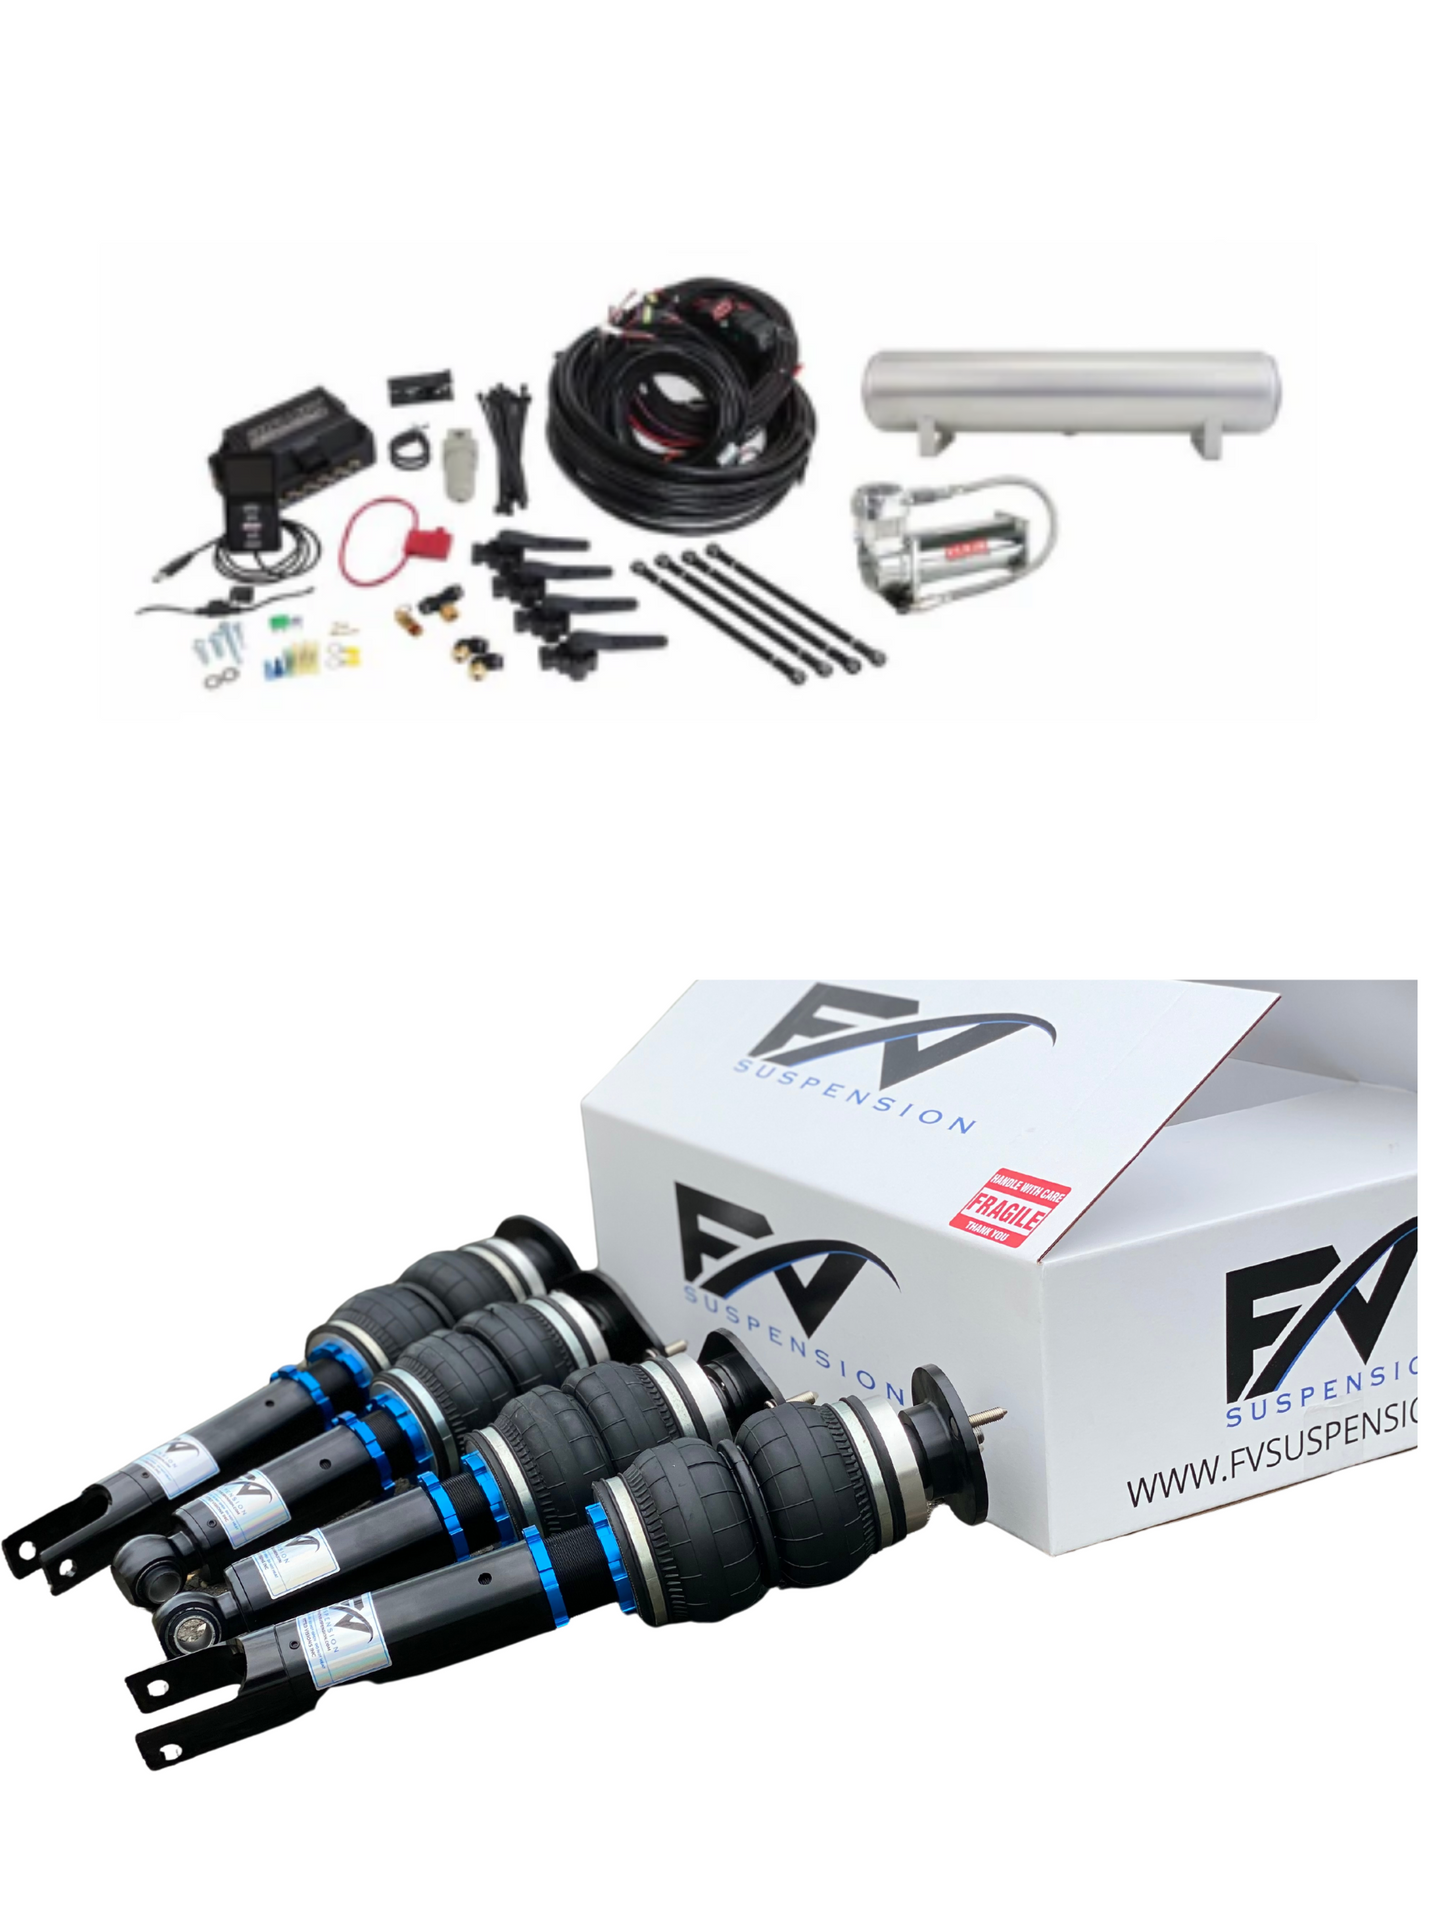 FV Suspension 3H Tier 3 Complete Air Ride kit for 13-21 Nissan Pathfinder - FV Suspension 3H Tier 3 Complete Air Ride kit for 13-21 Nissan Pathfinder - FVALtier3kit558